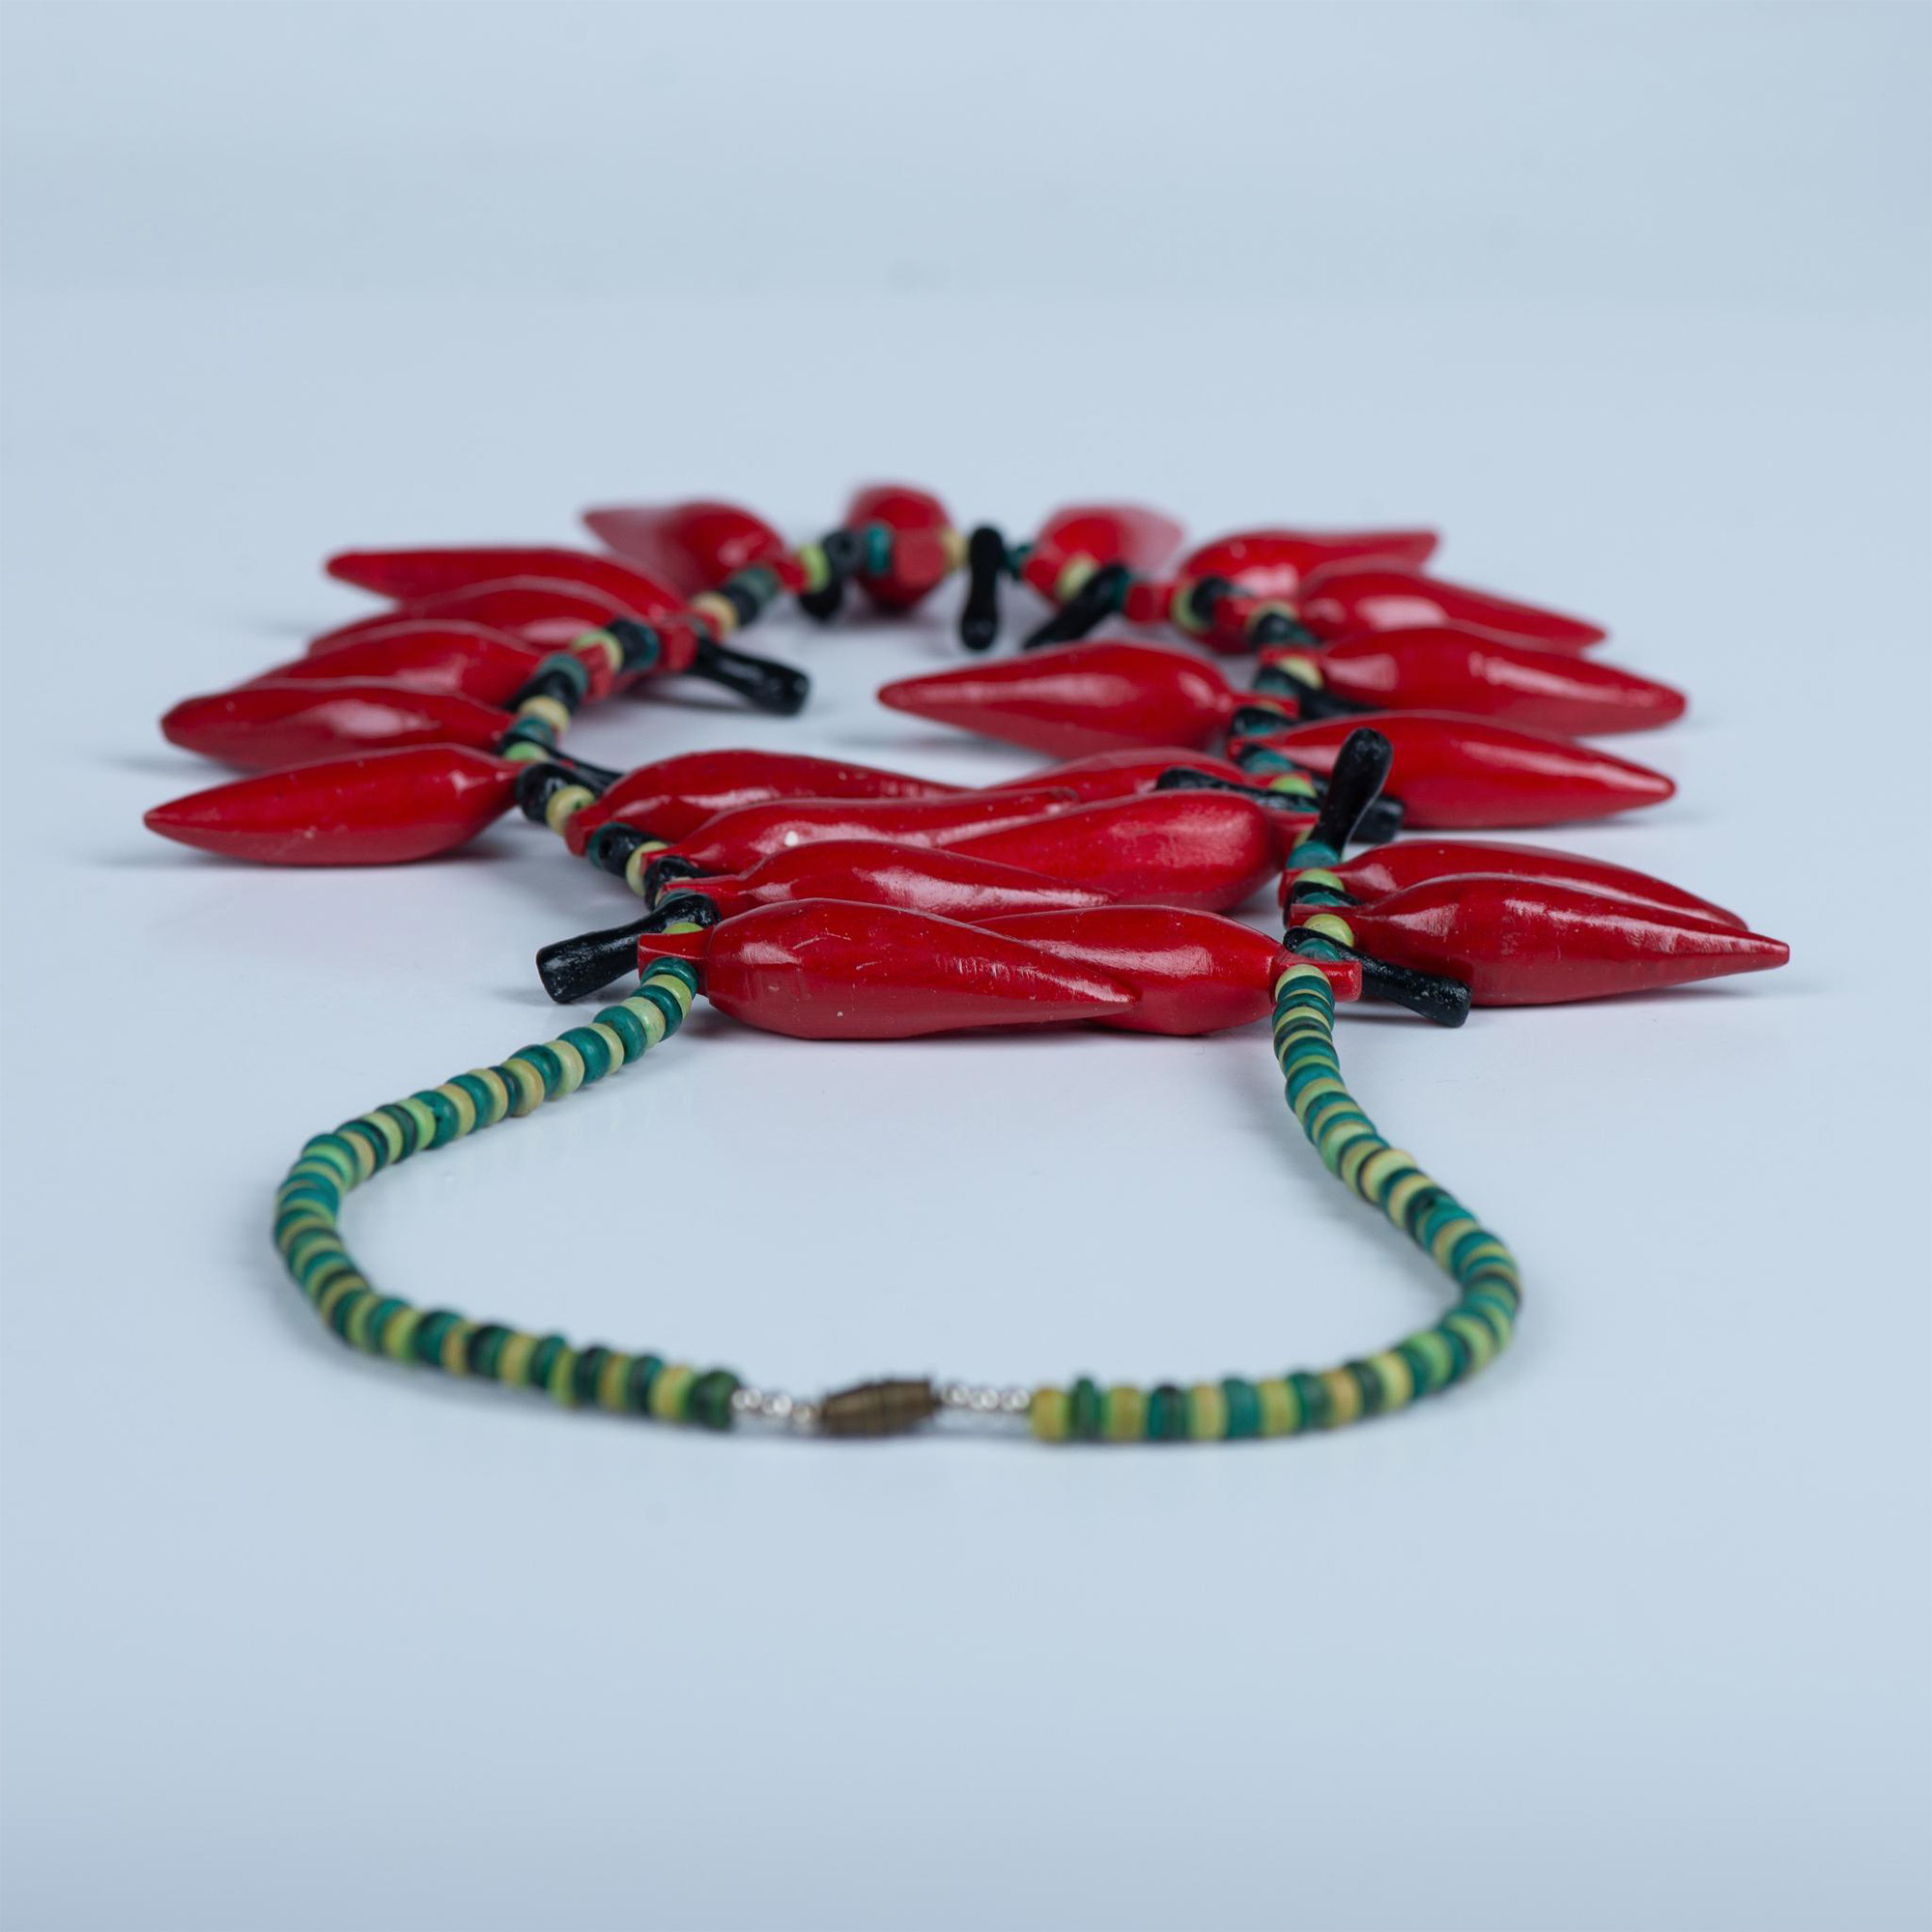 Retro Wood Red Chili Pepper Necklace - Image 5 of 6